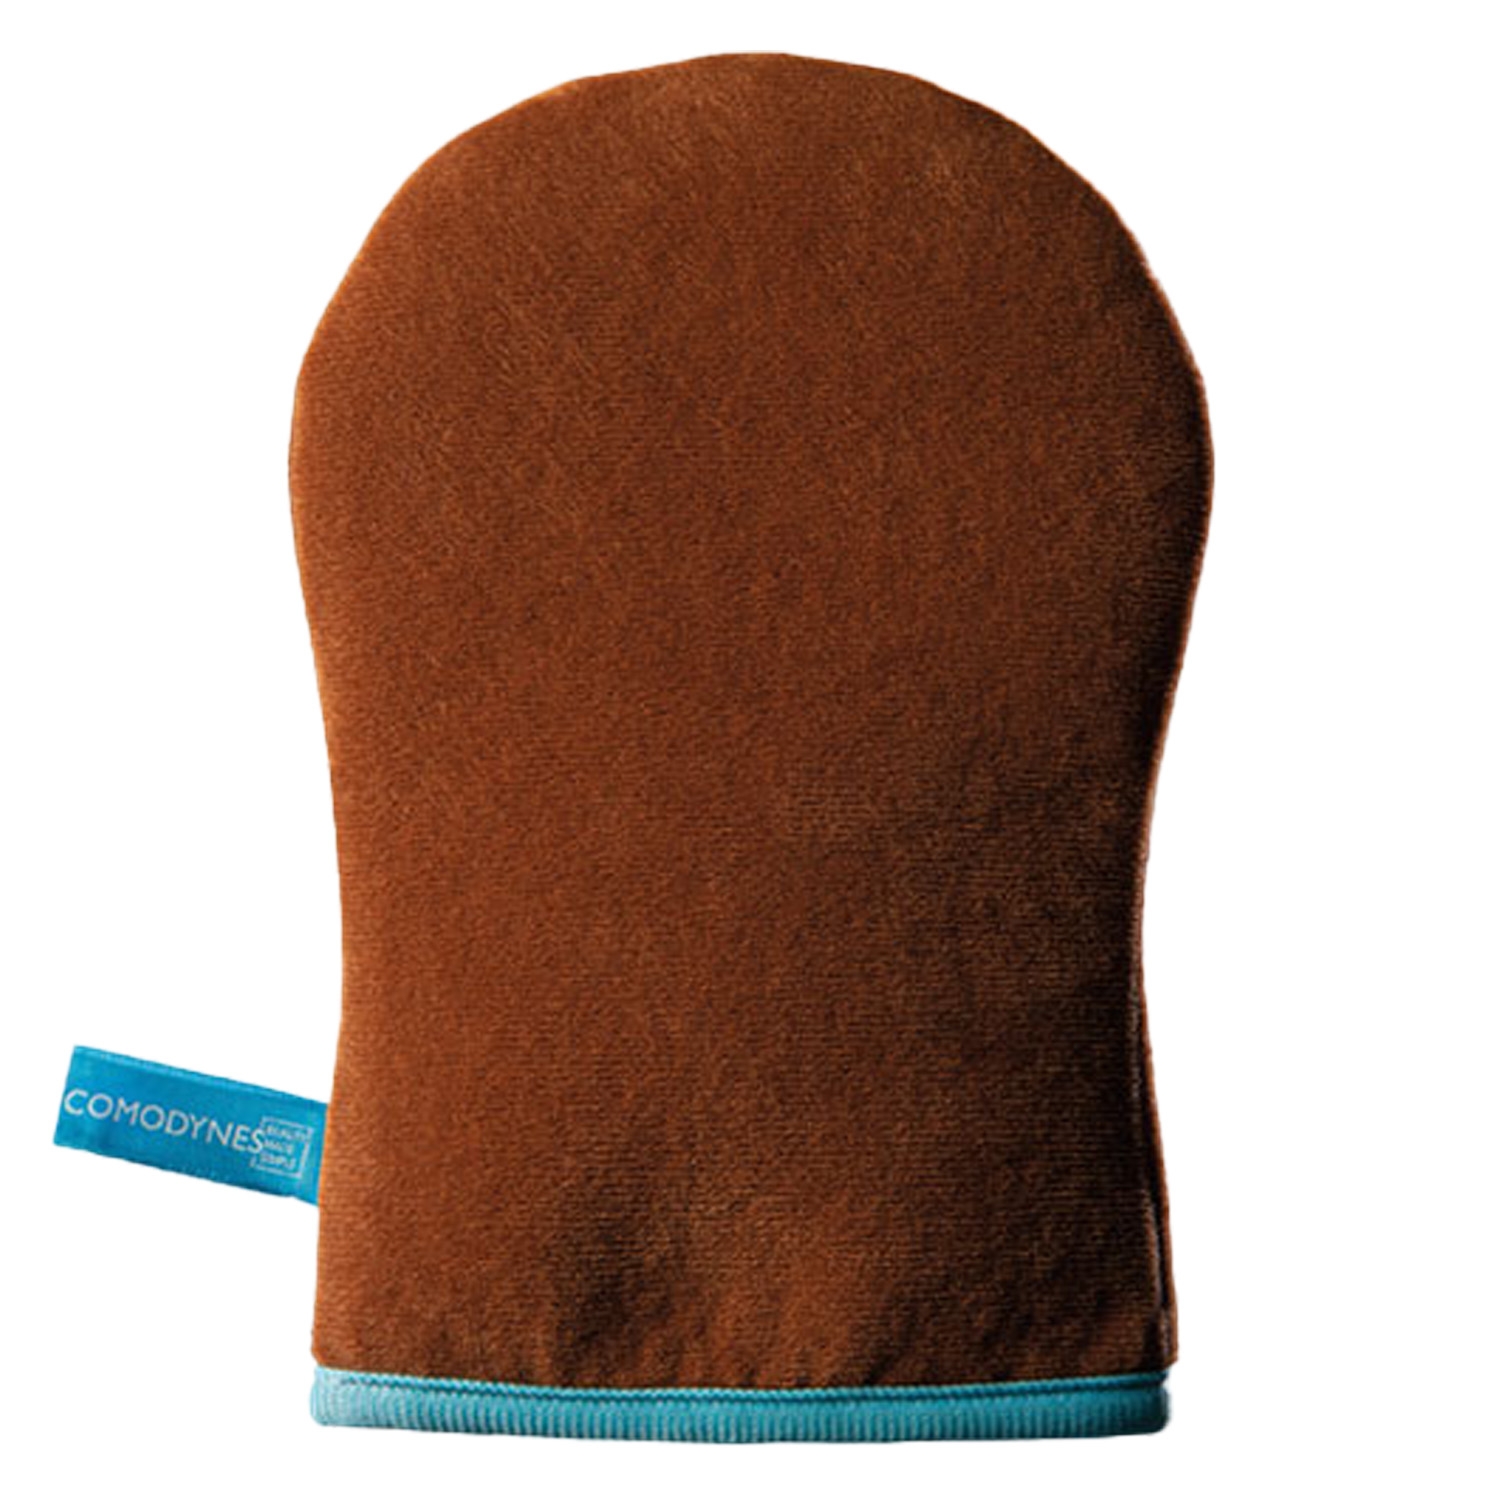 Product image from COMODYNES - Self-Tanning Handschuh